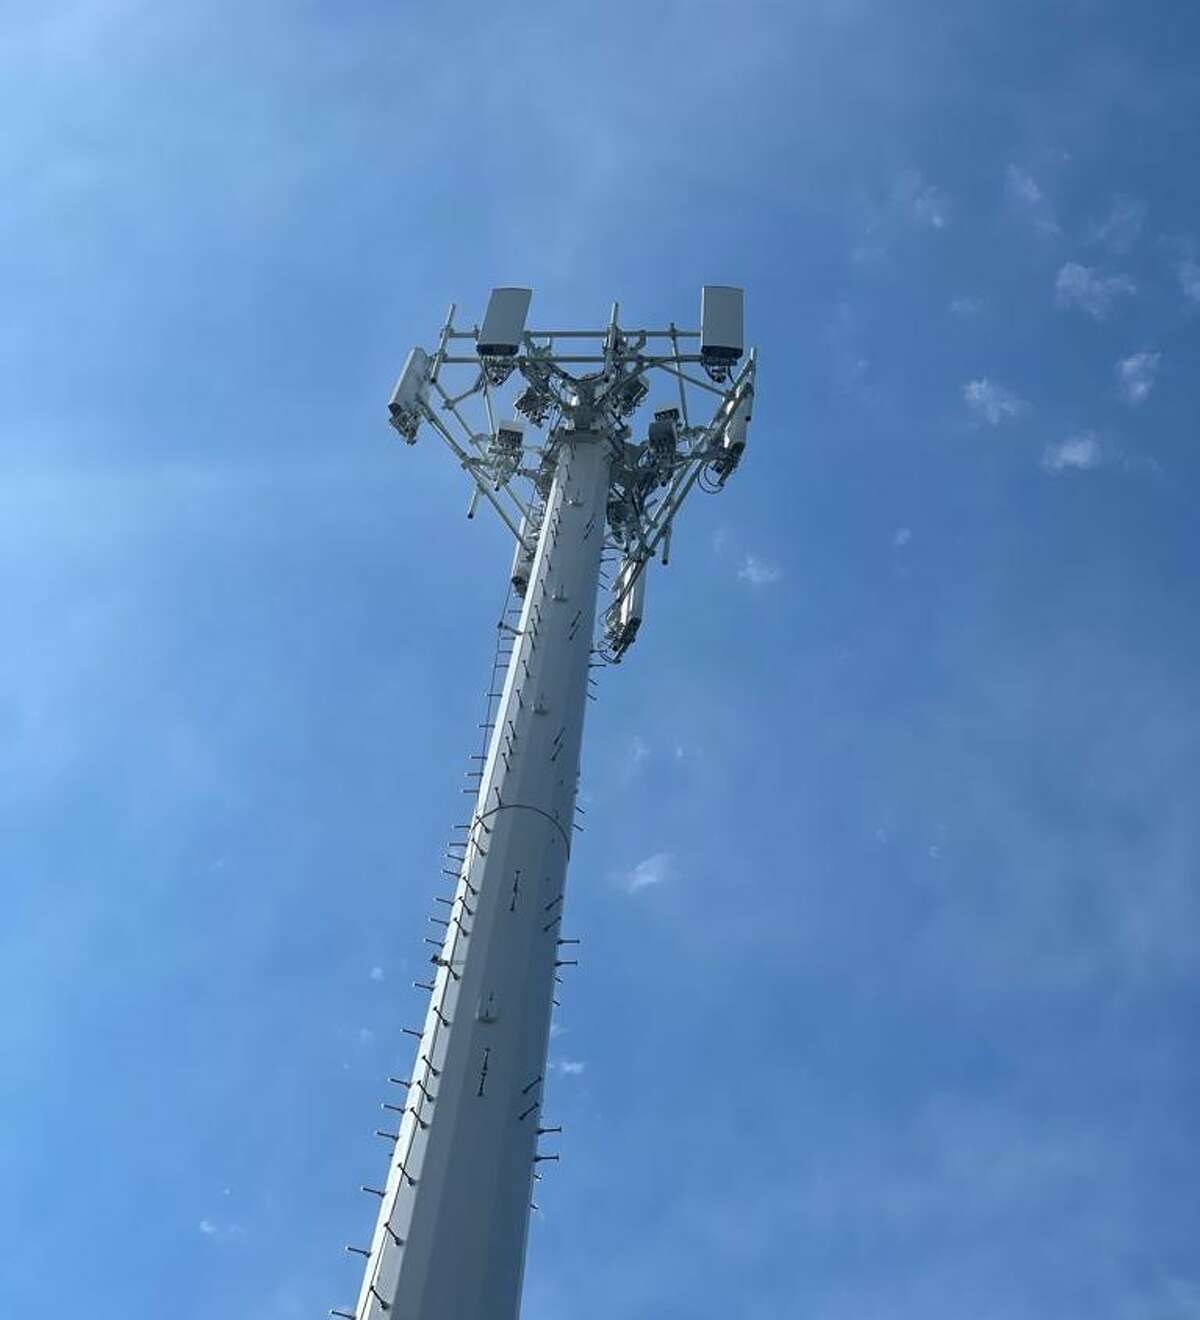 Kent residents and first responders will have improved service through AT&T's new cell tower at 93 Richards Road.